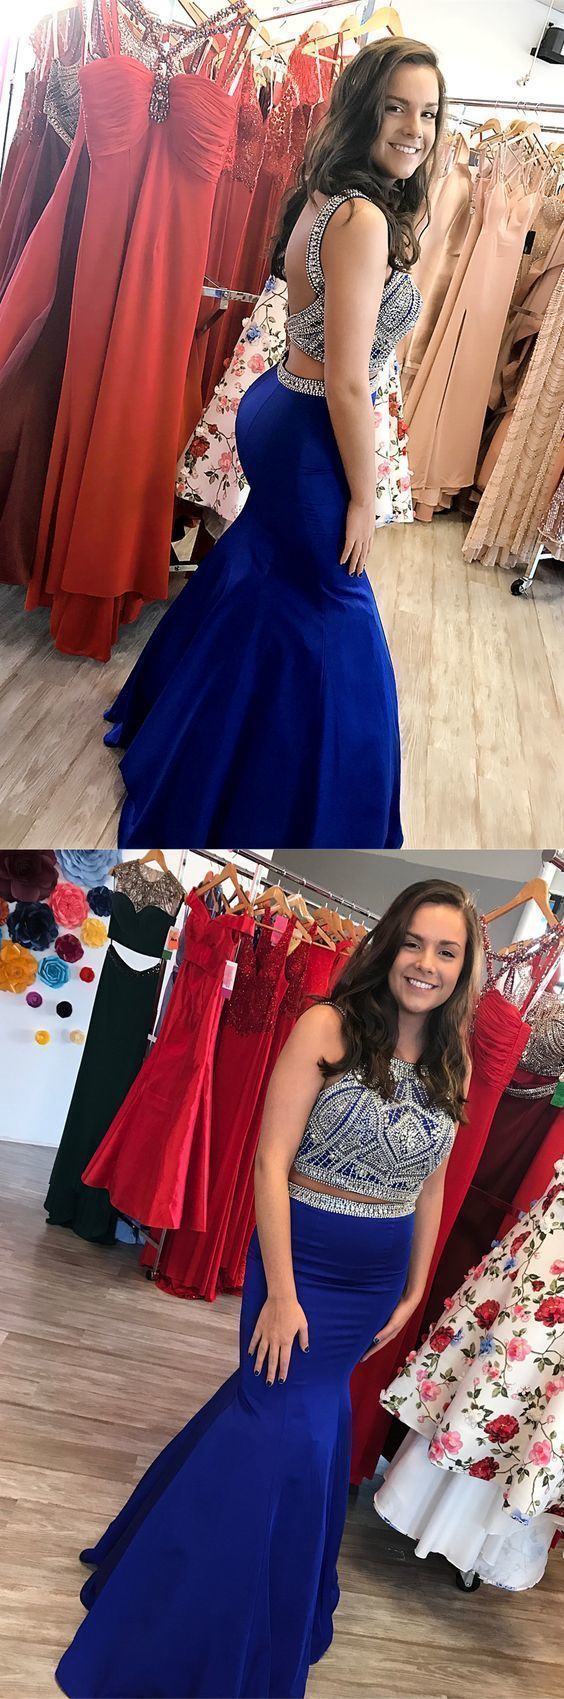 Sparkly Beaded Two Piece Prom Dresses, Royal Blue Satin Evening Party Gowns CD11534